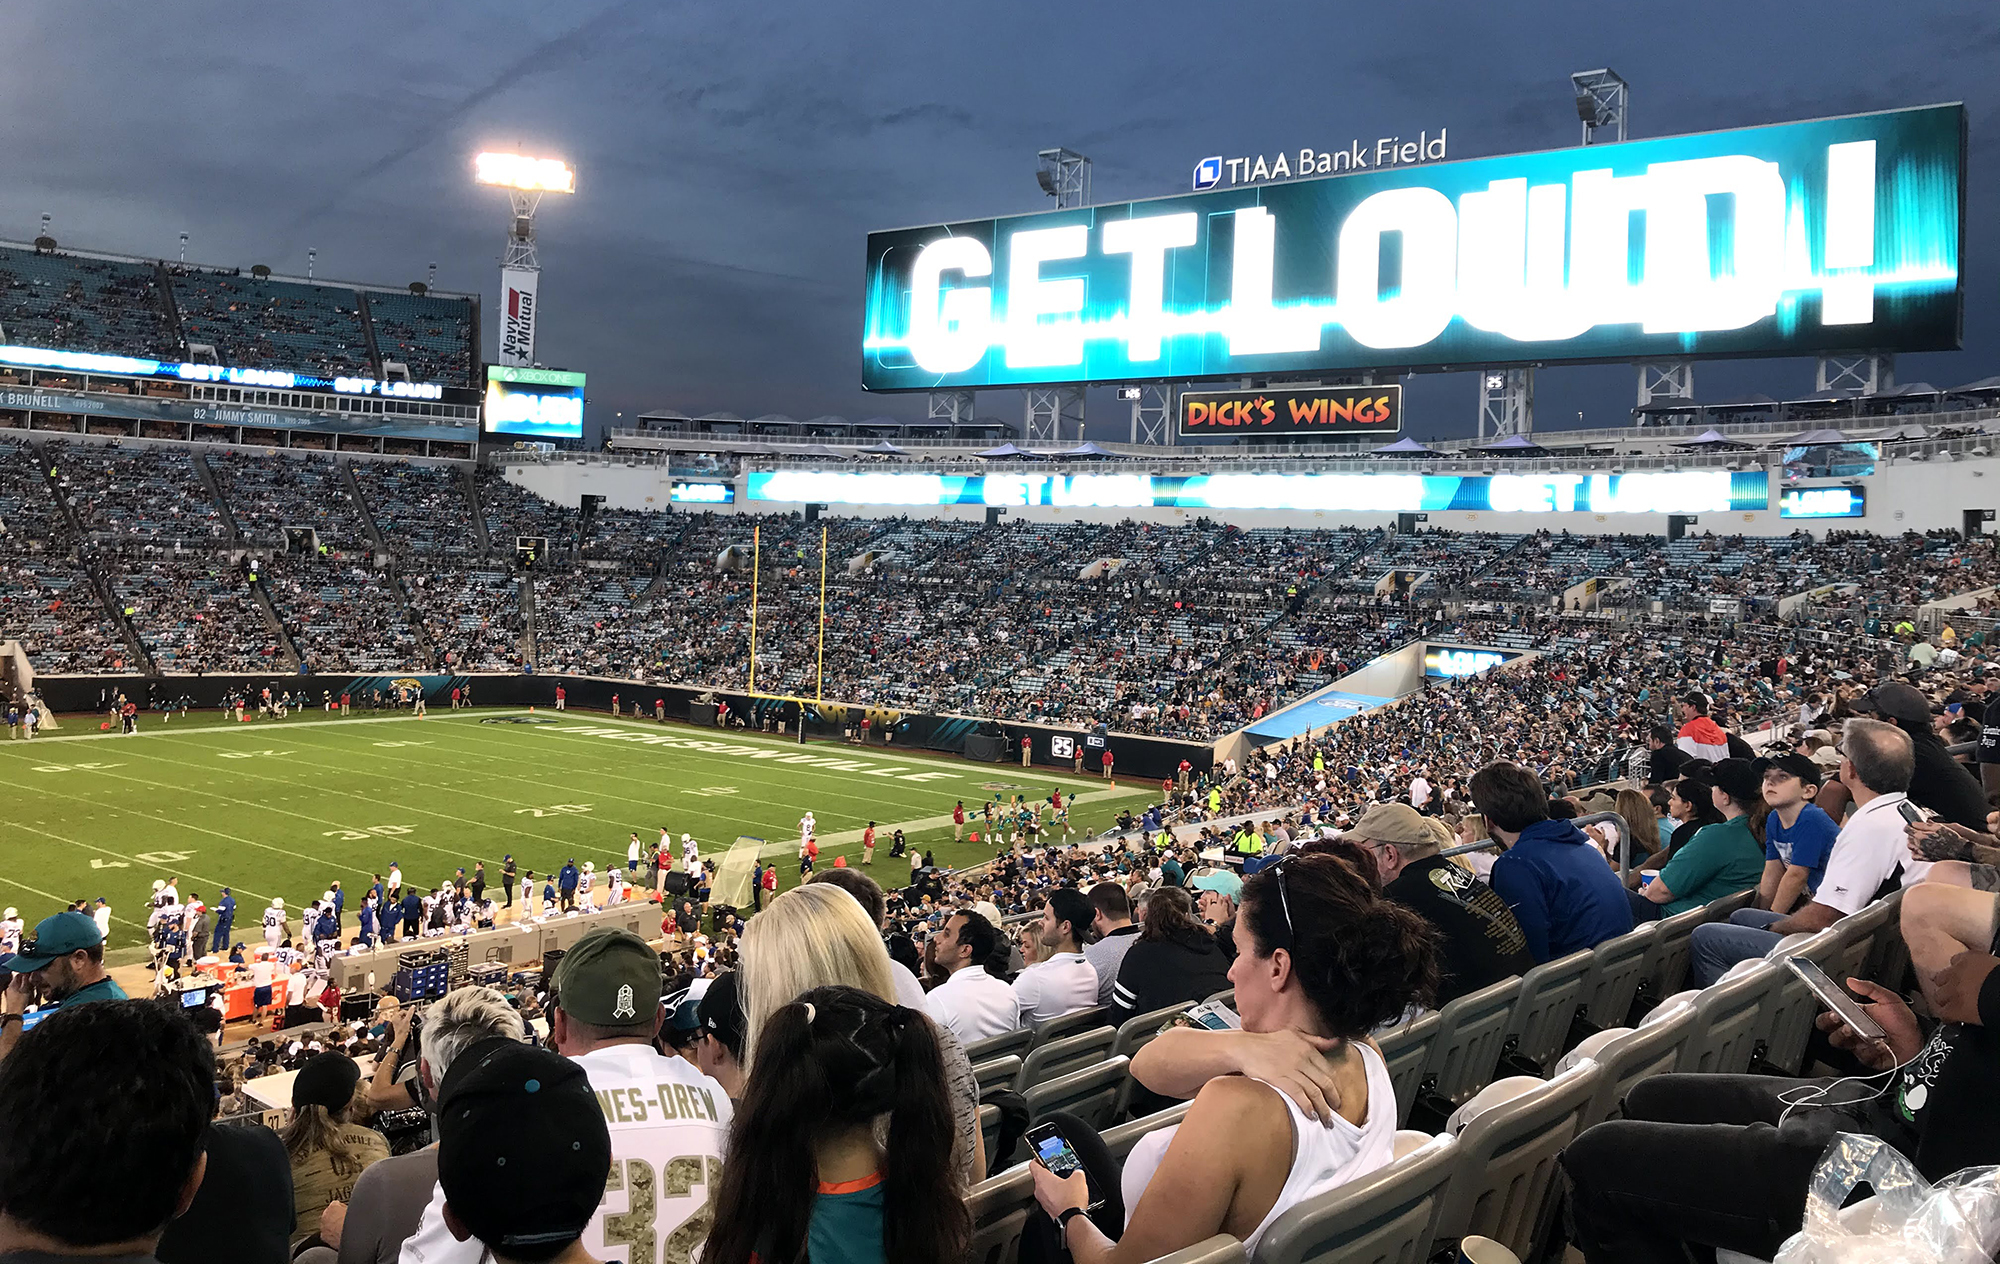 TIAA Bank Field is the home of the Jacksonville Jaguars.